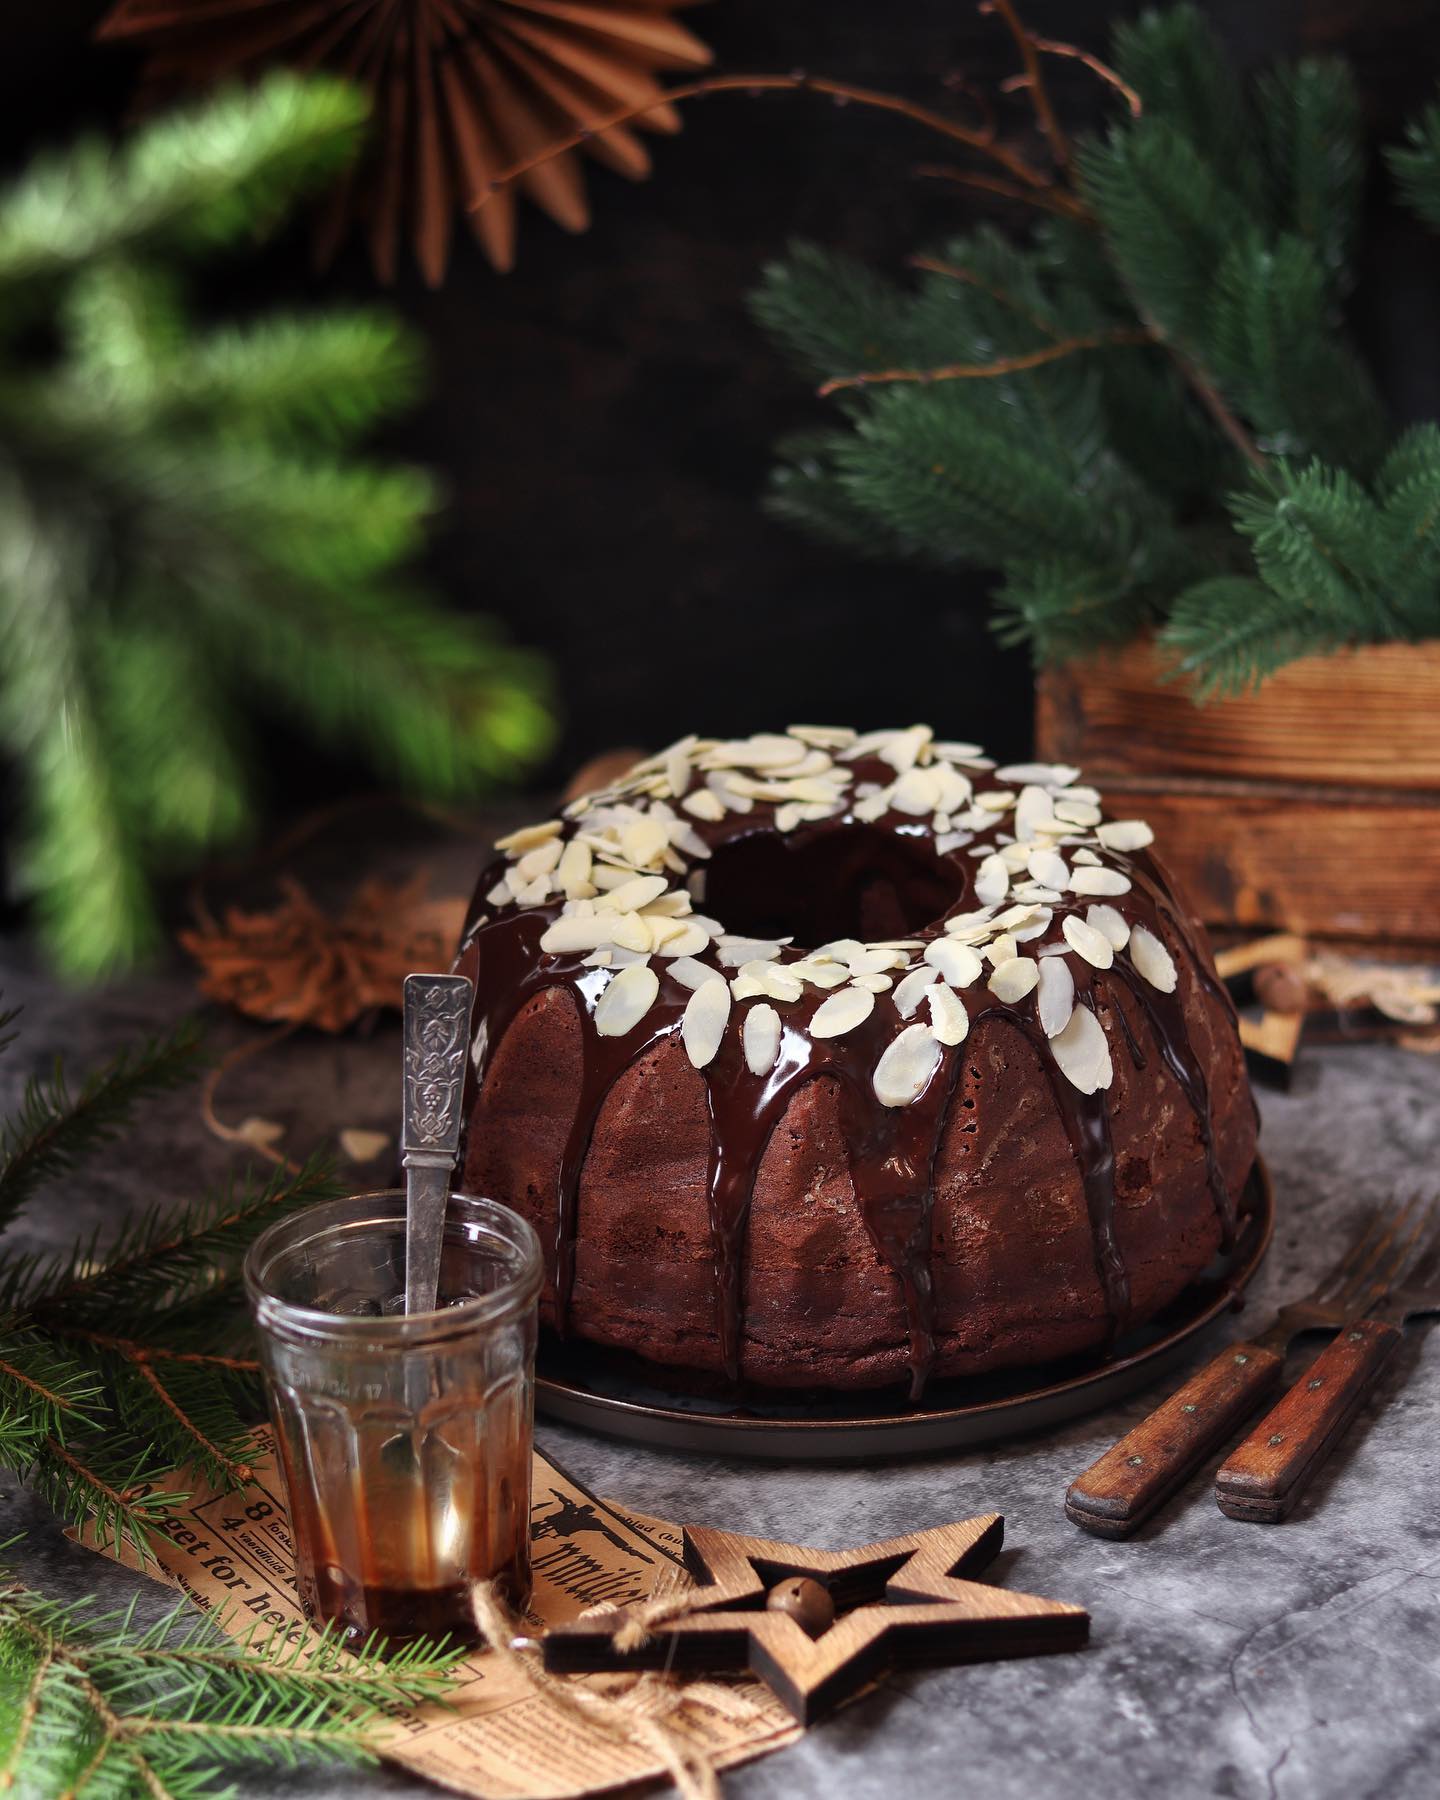 Chocolate tea cake with cherry filling